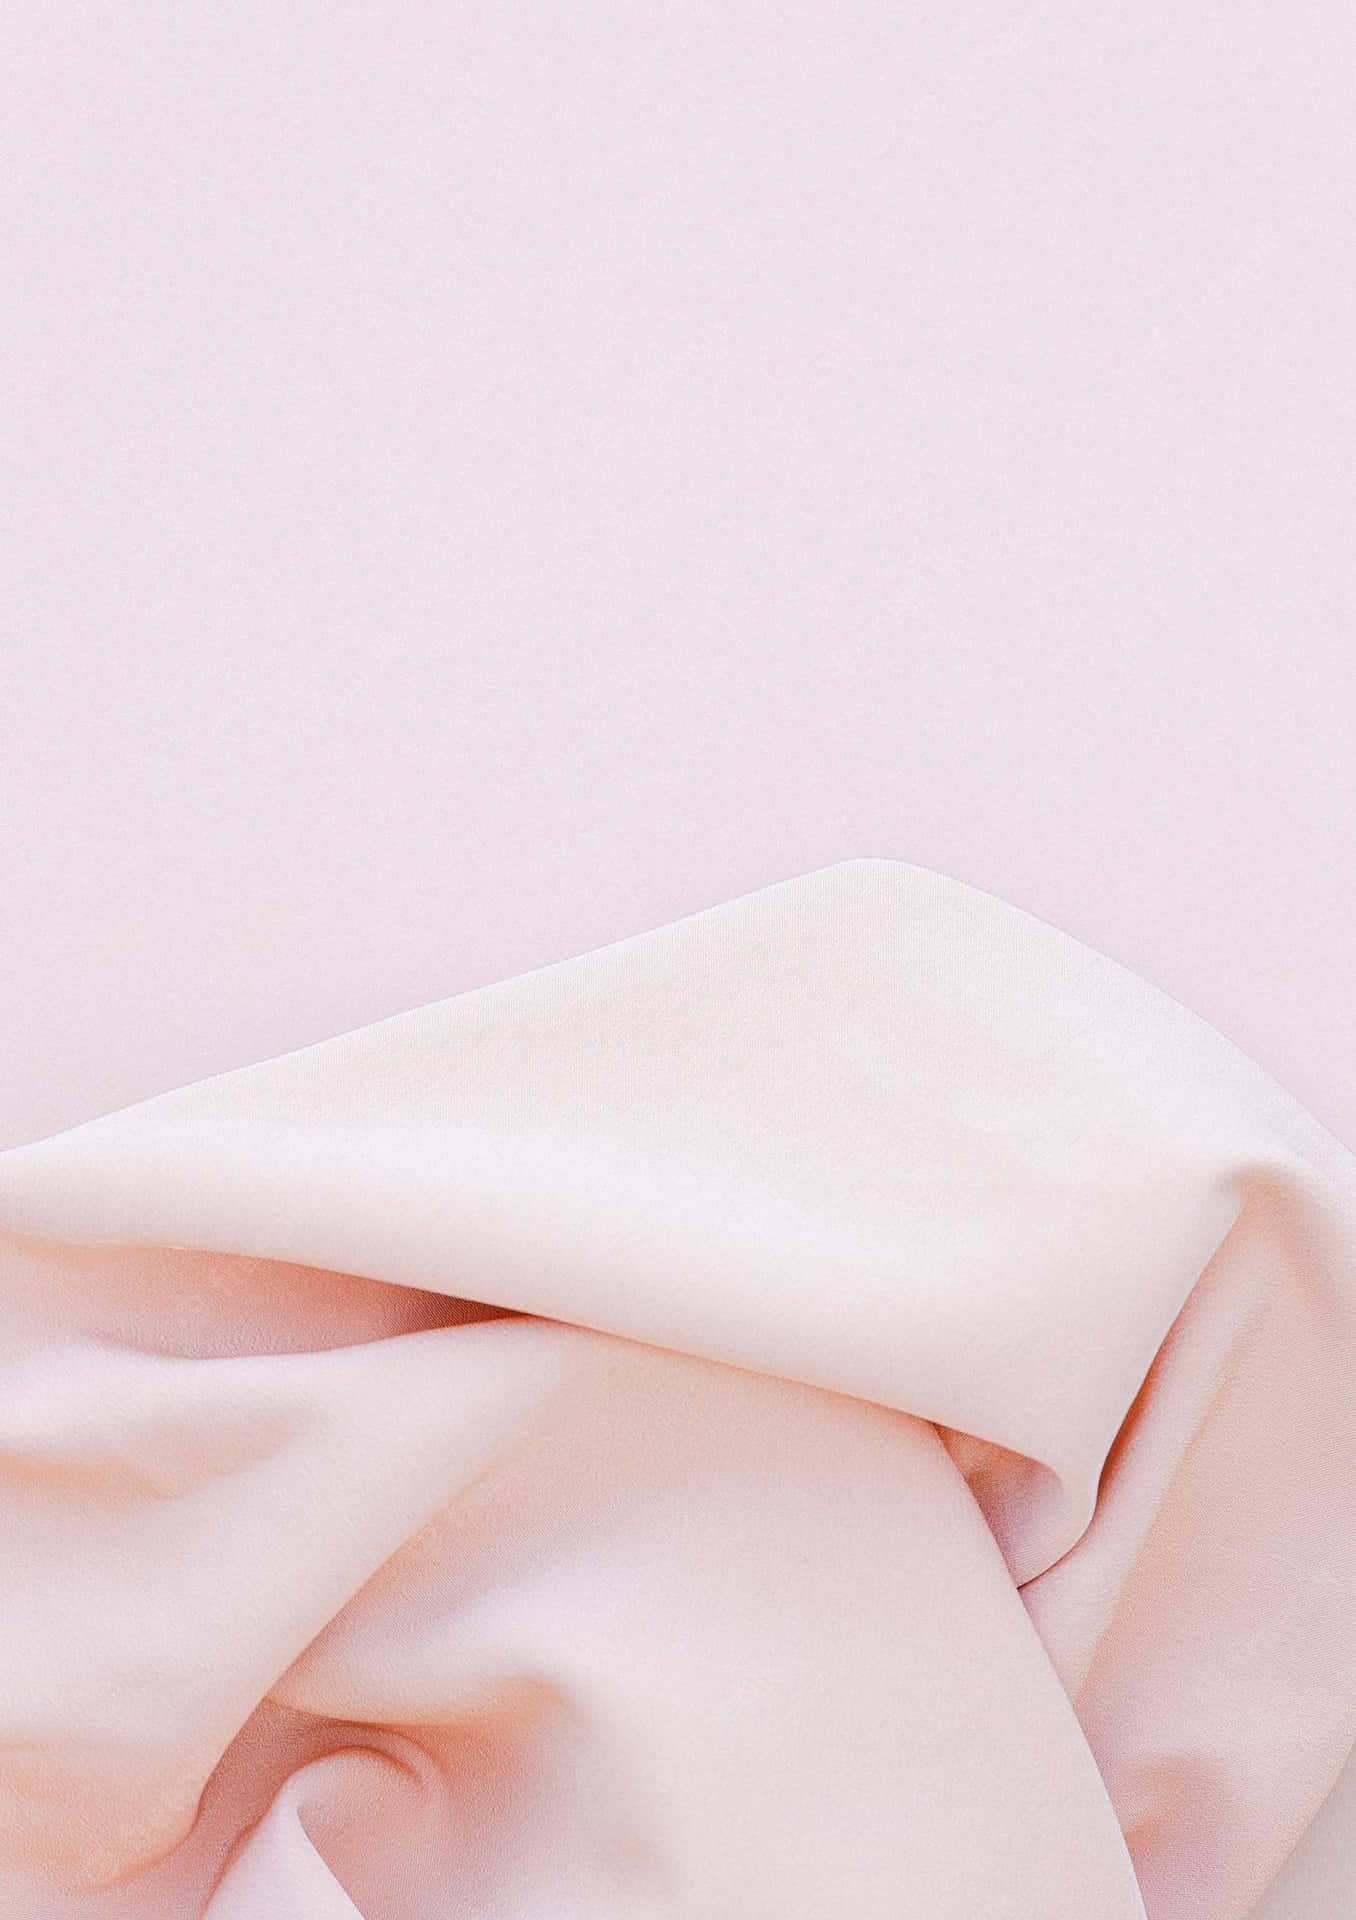 A Pink Blanket On A White Surface Wallpaper